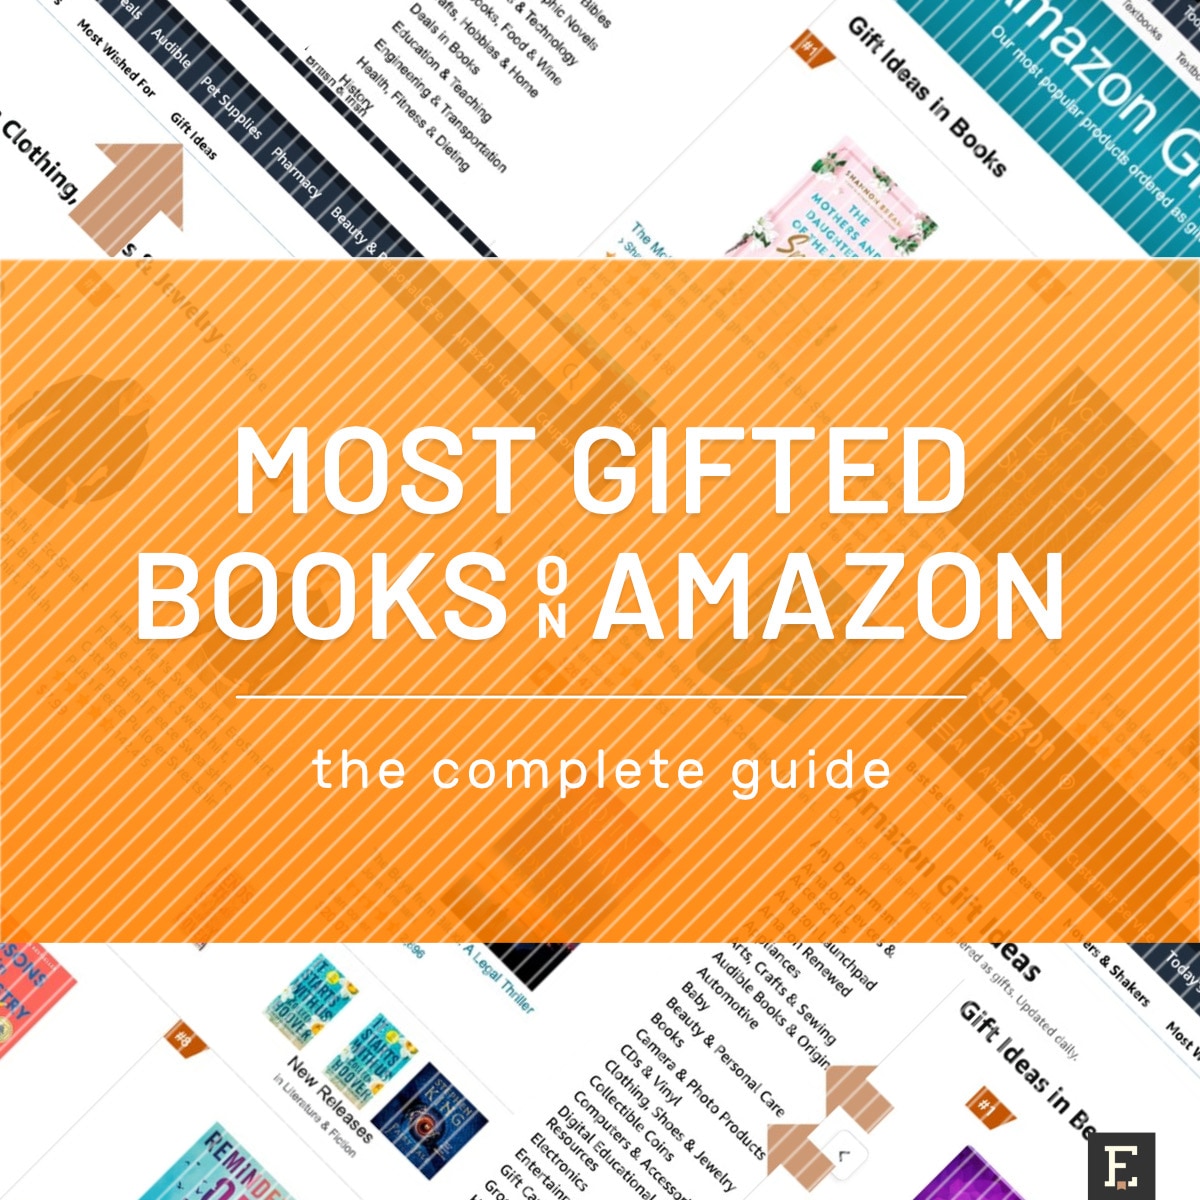 Most gifted books audiobooks on Amazon complete guide